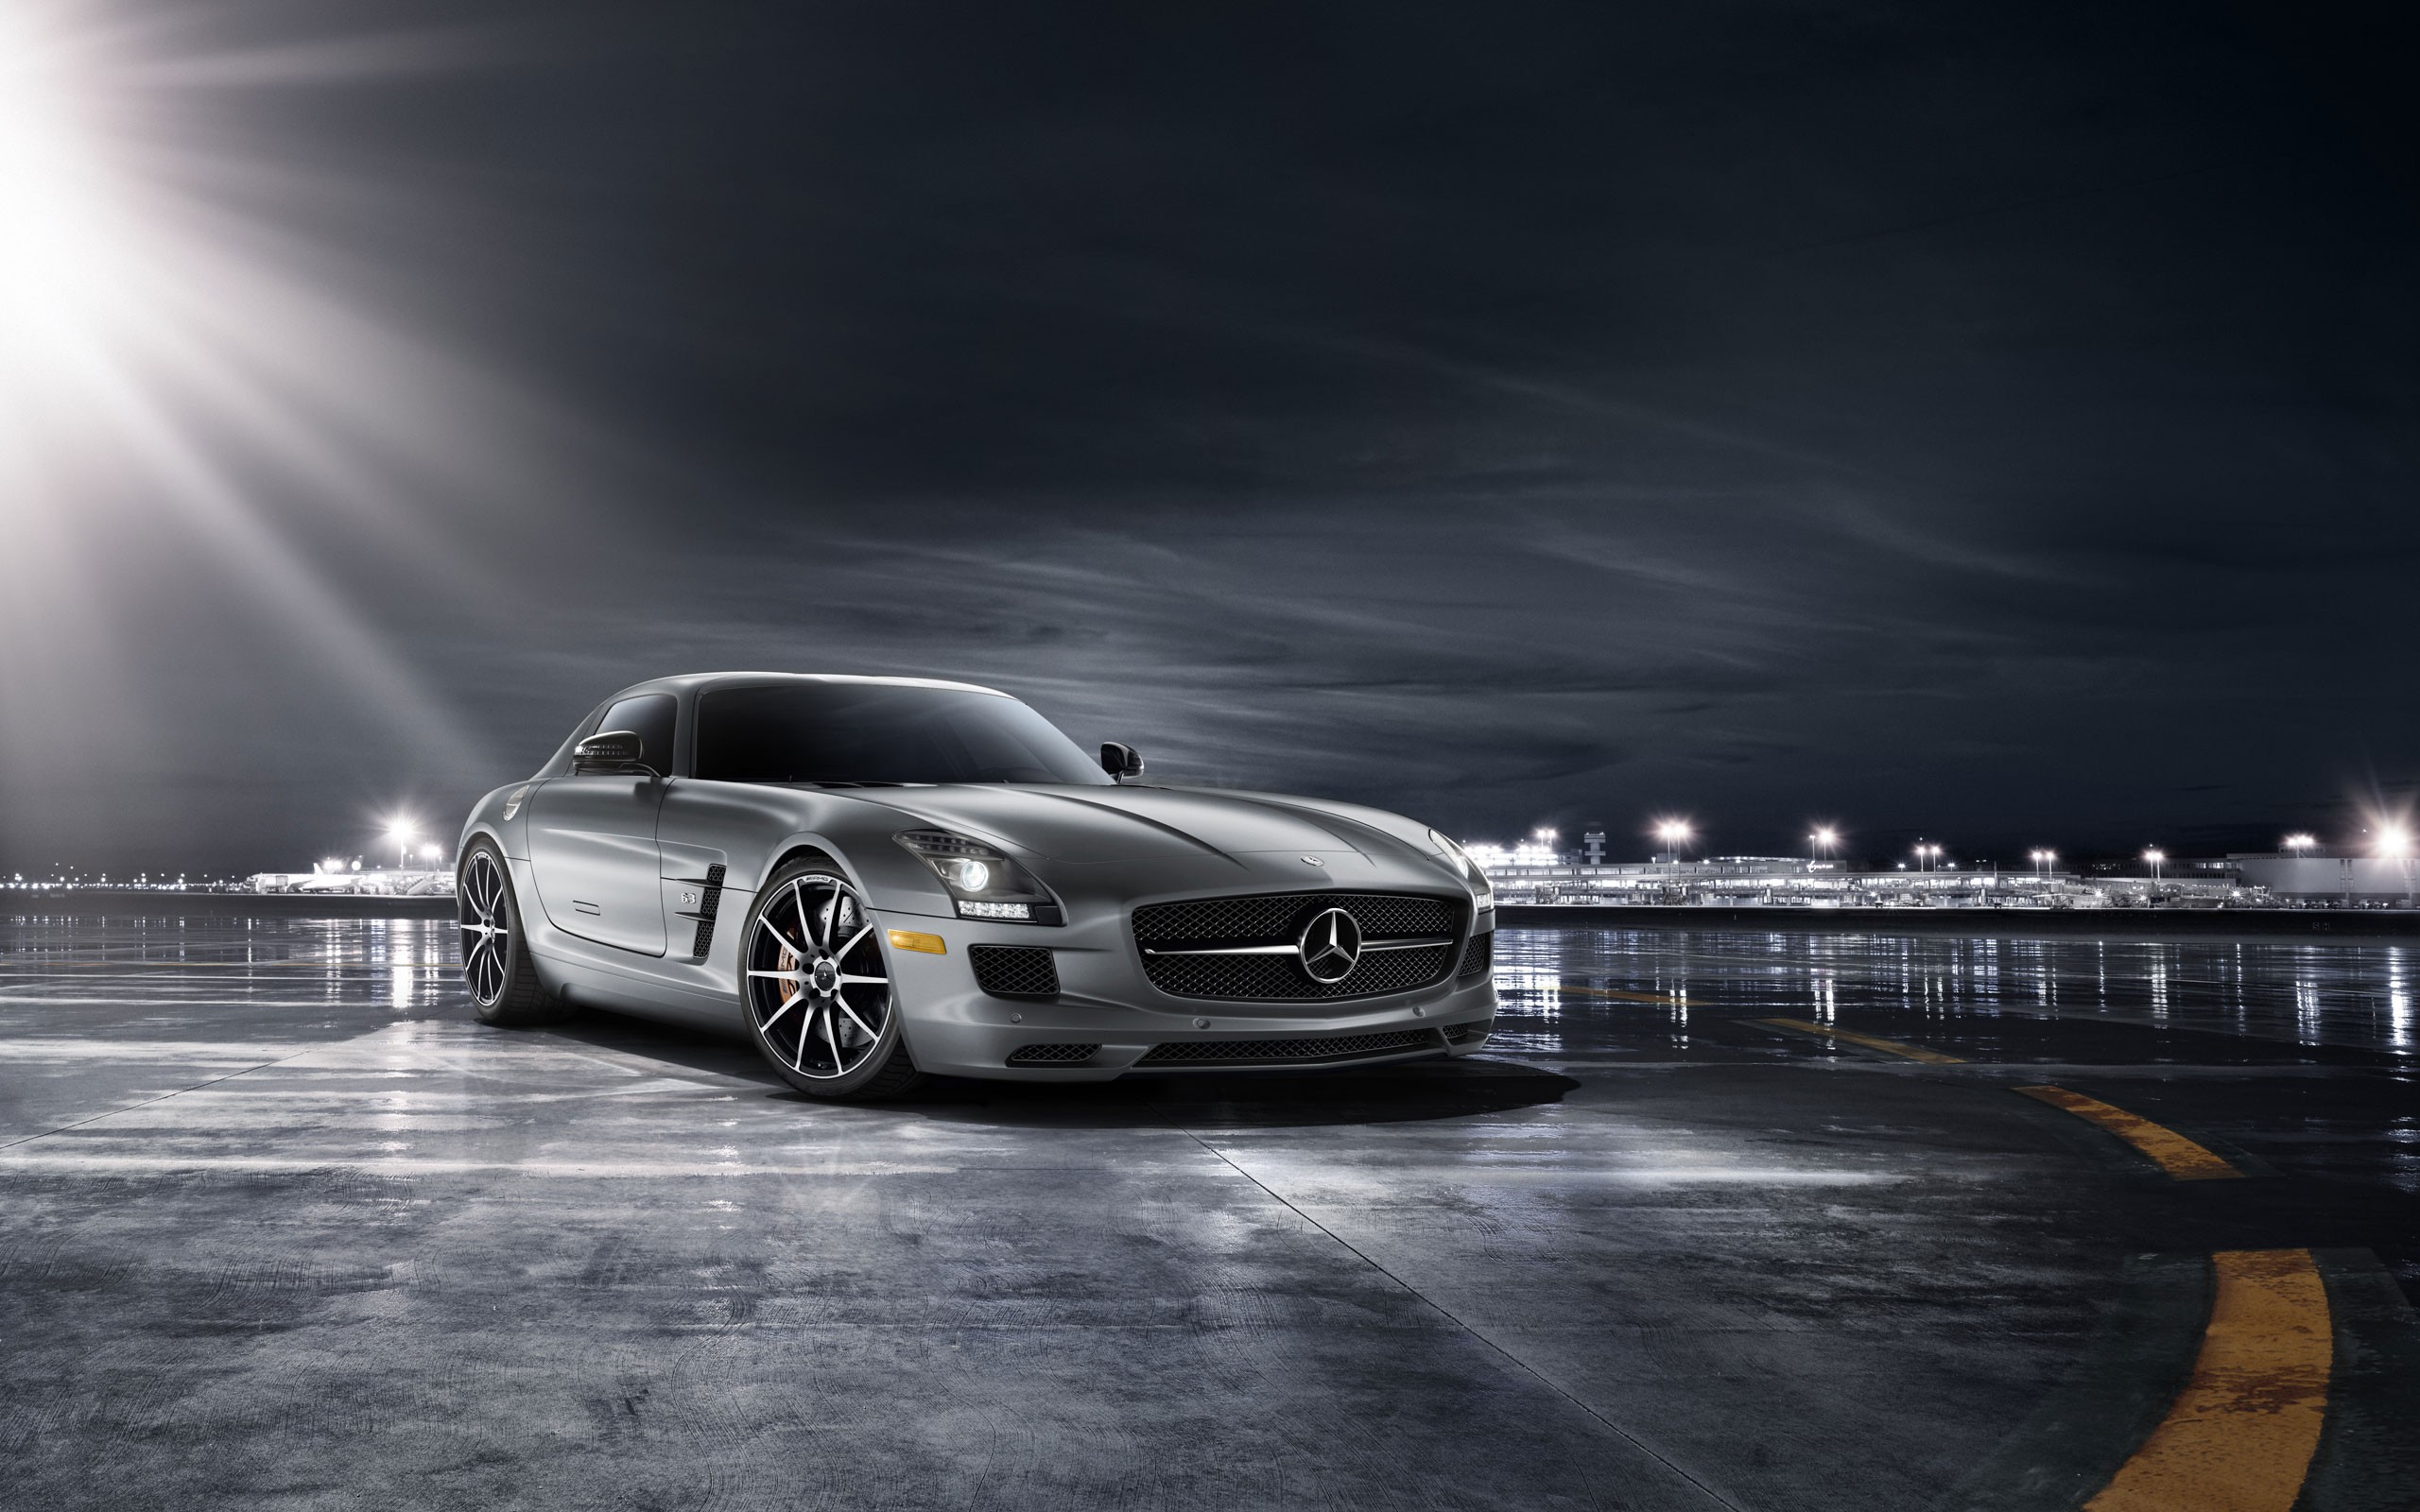 Mercedes Benz AMG GT Wallpapers and Background Images   stmednet